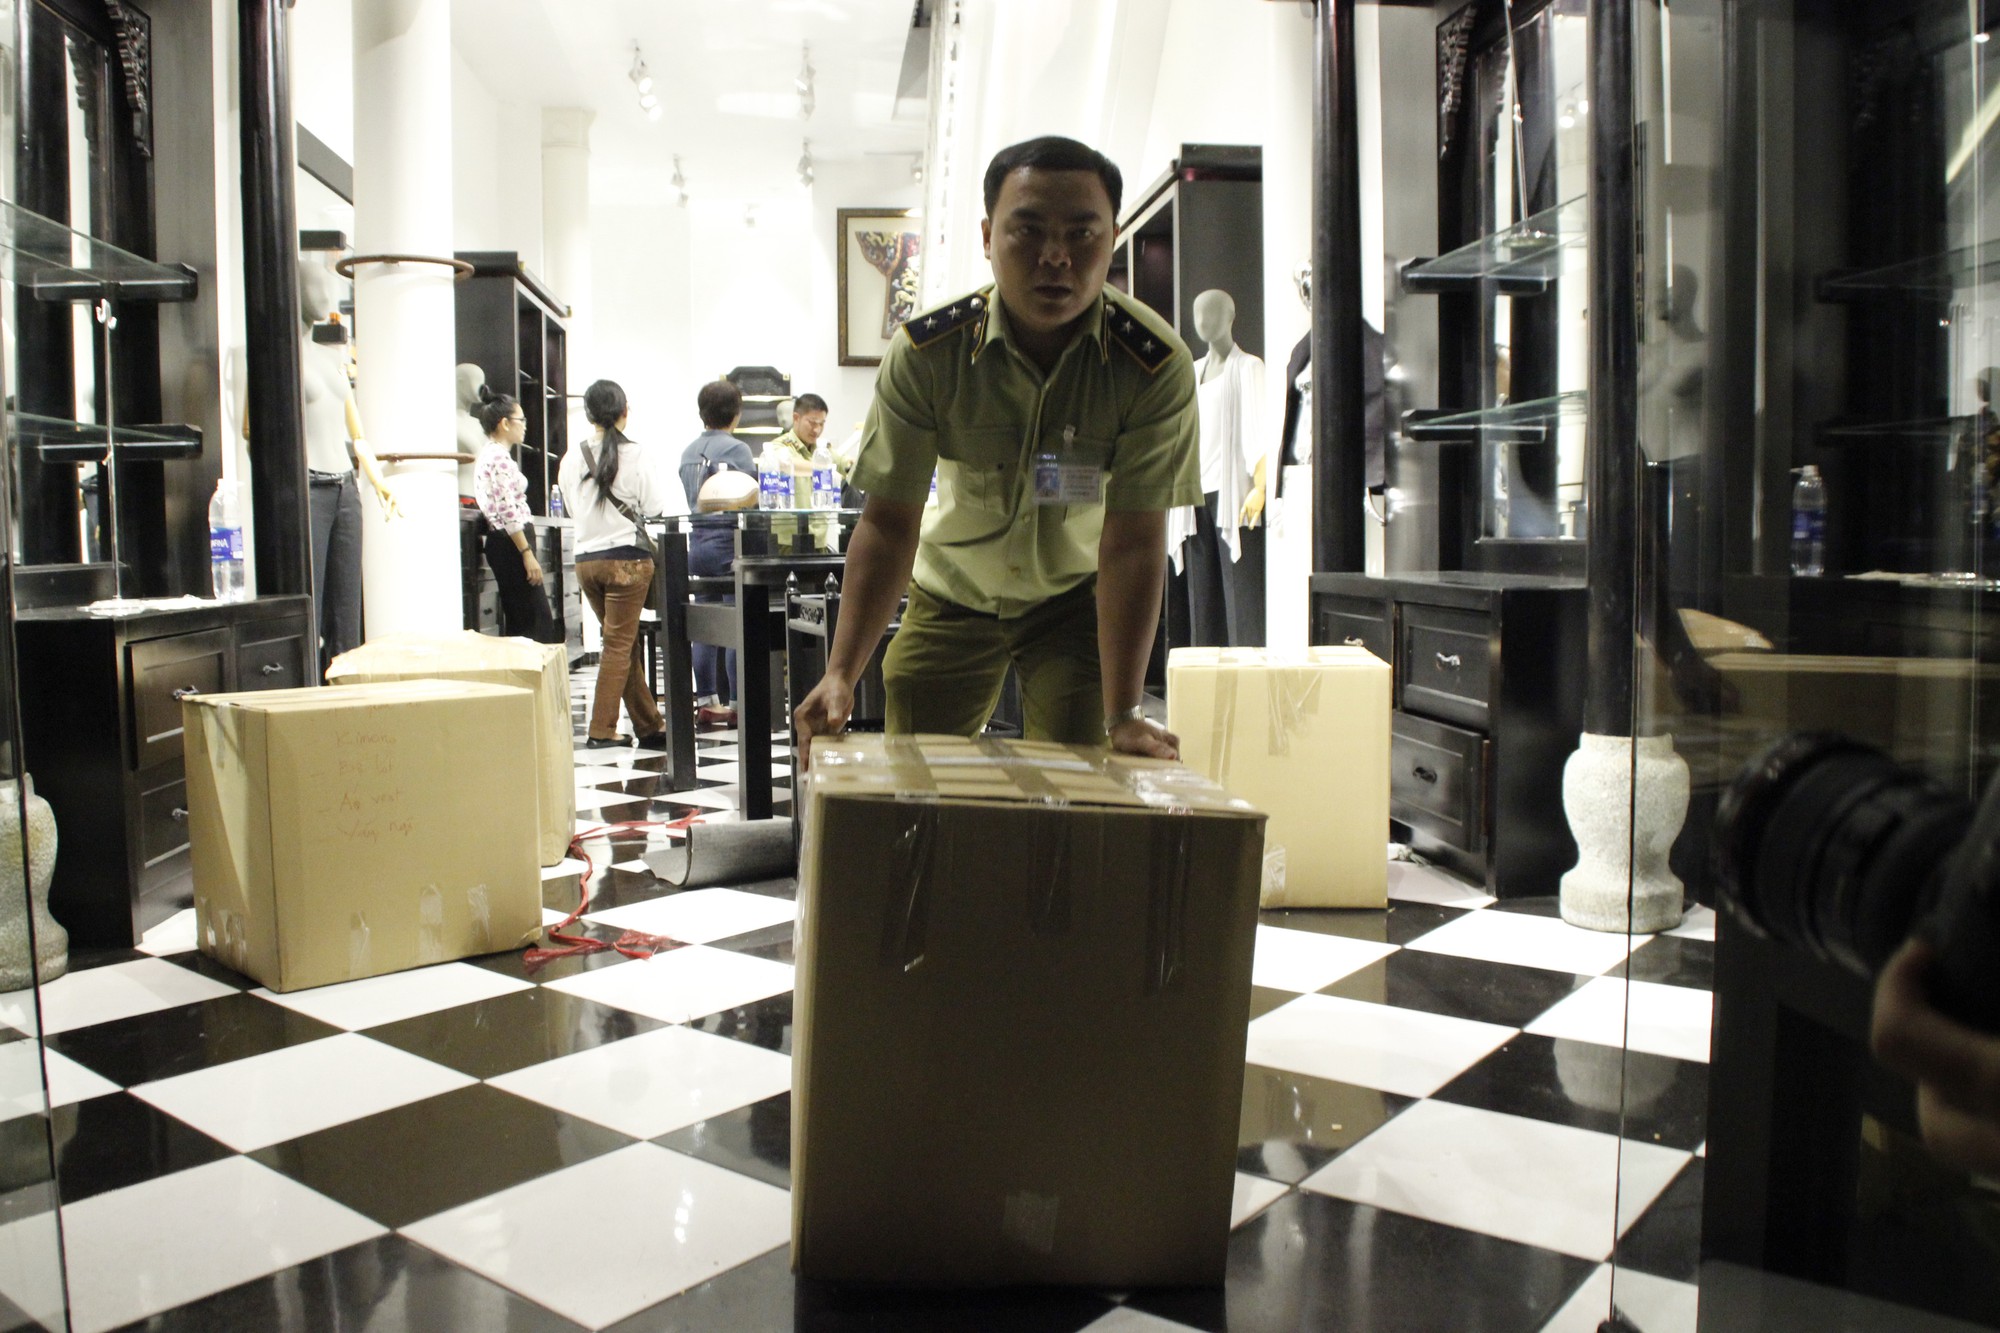 Over 1,000 Khaisilk products confiscated in Ho Chi Minh City amid mislabeling crisis